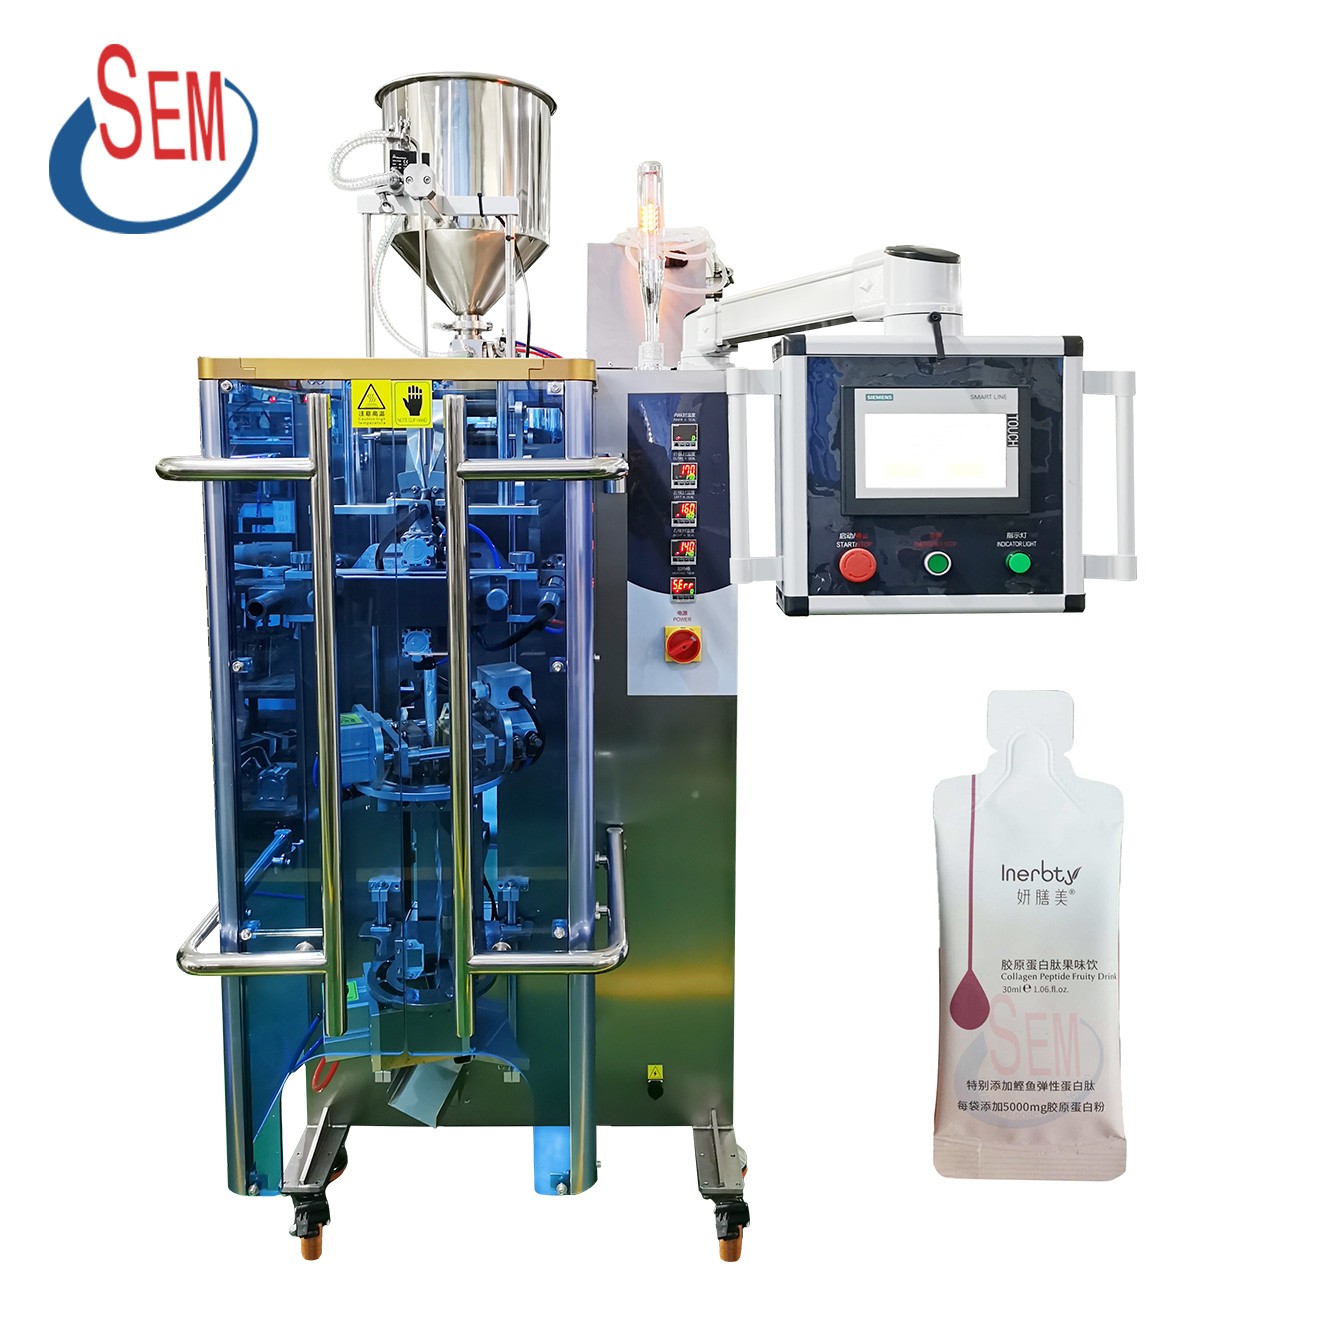 Autoamtic Envelop sachet Packing machine--Delivered to USA